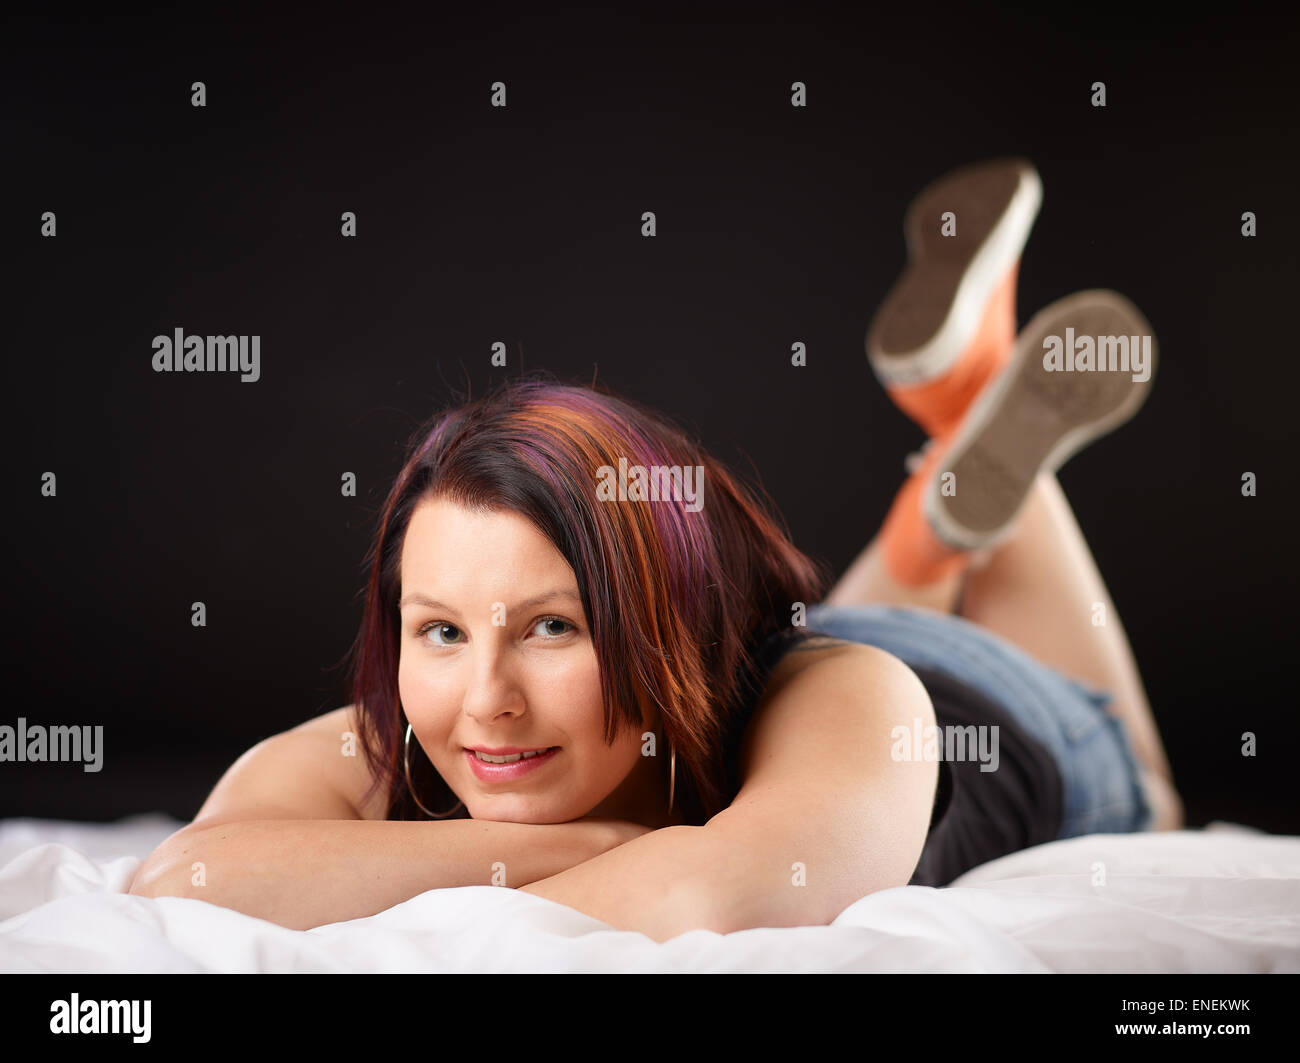 Girl on bed and sneakers Stock Photo